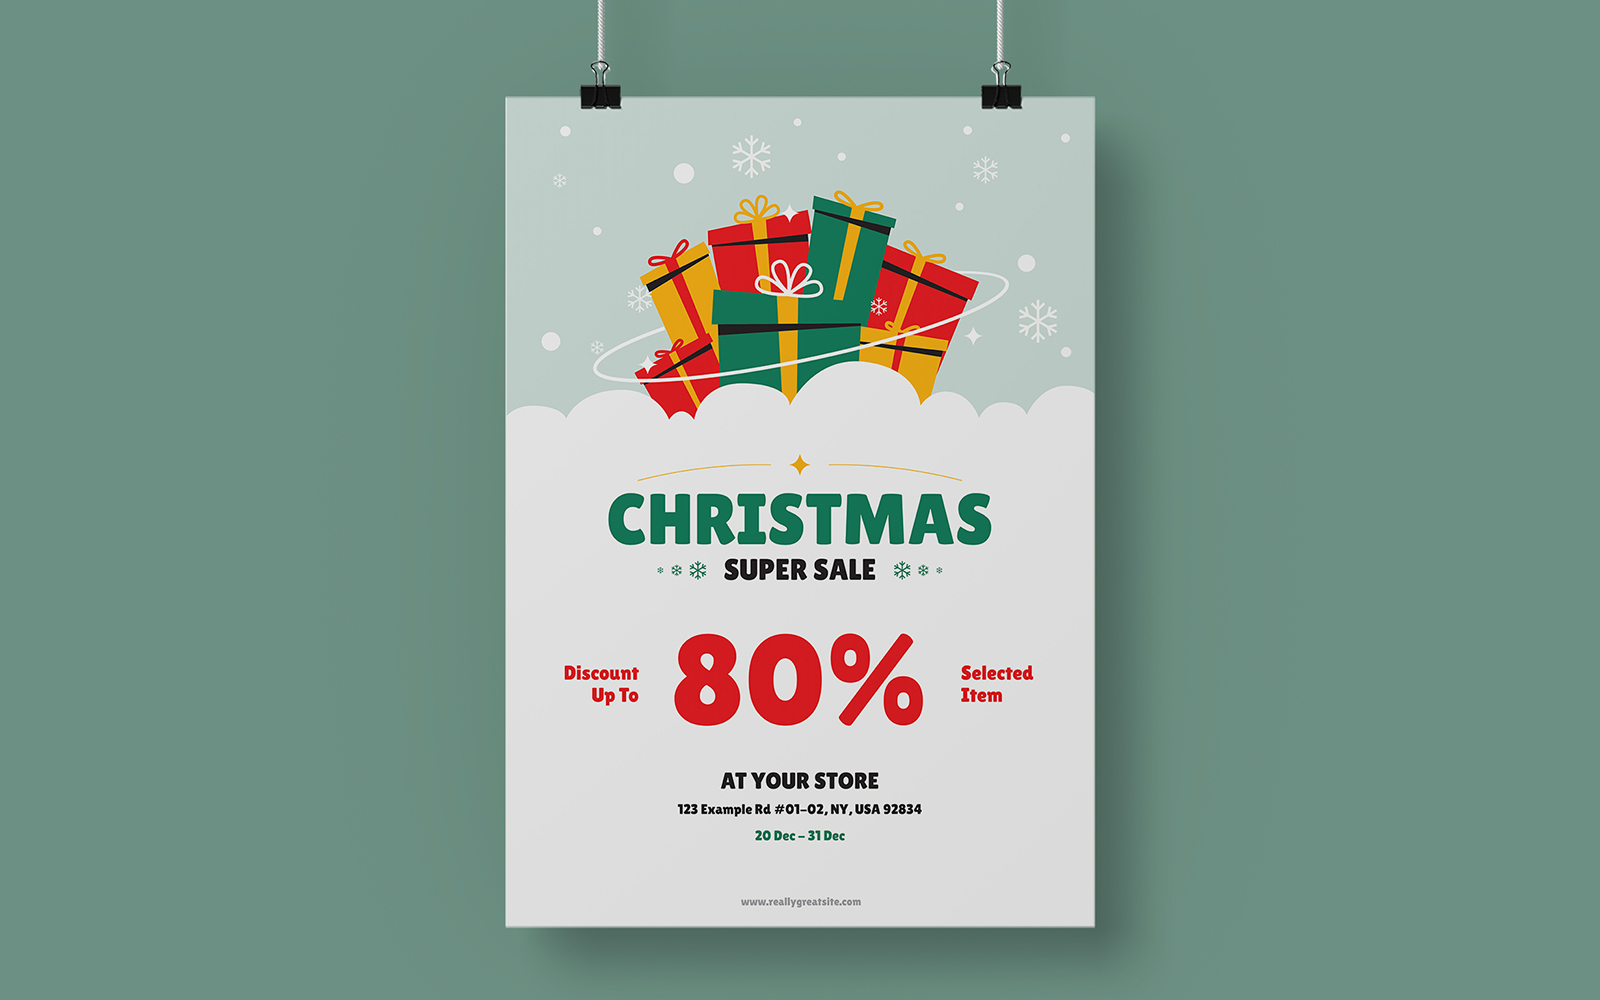 Christmas Super Sale Poster Template